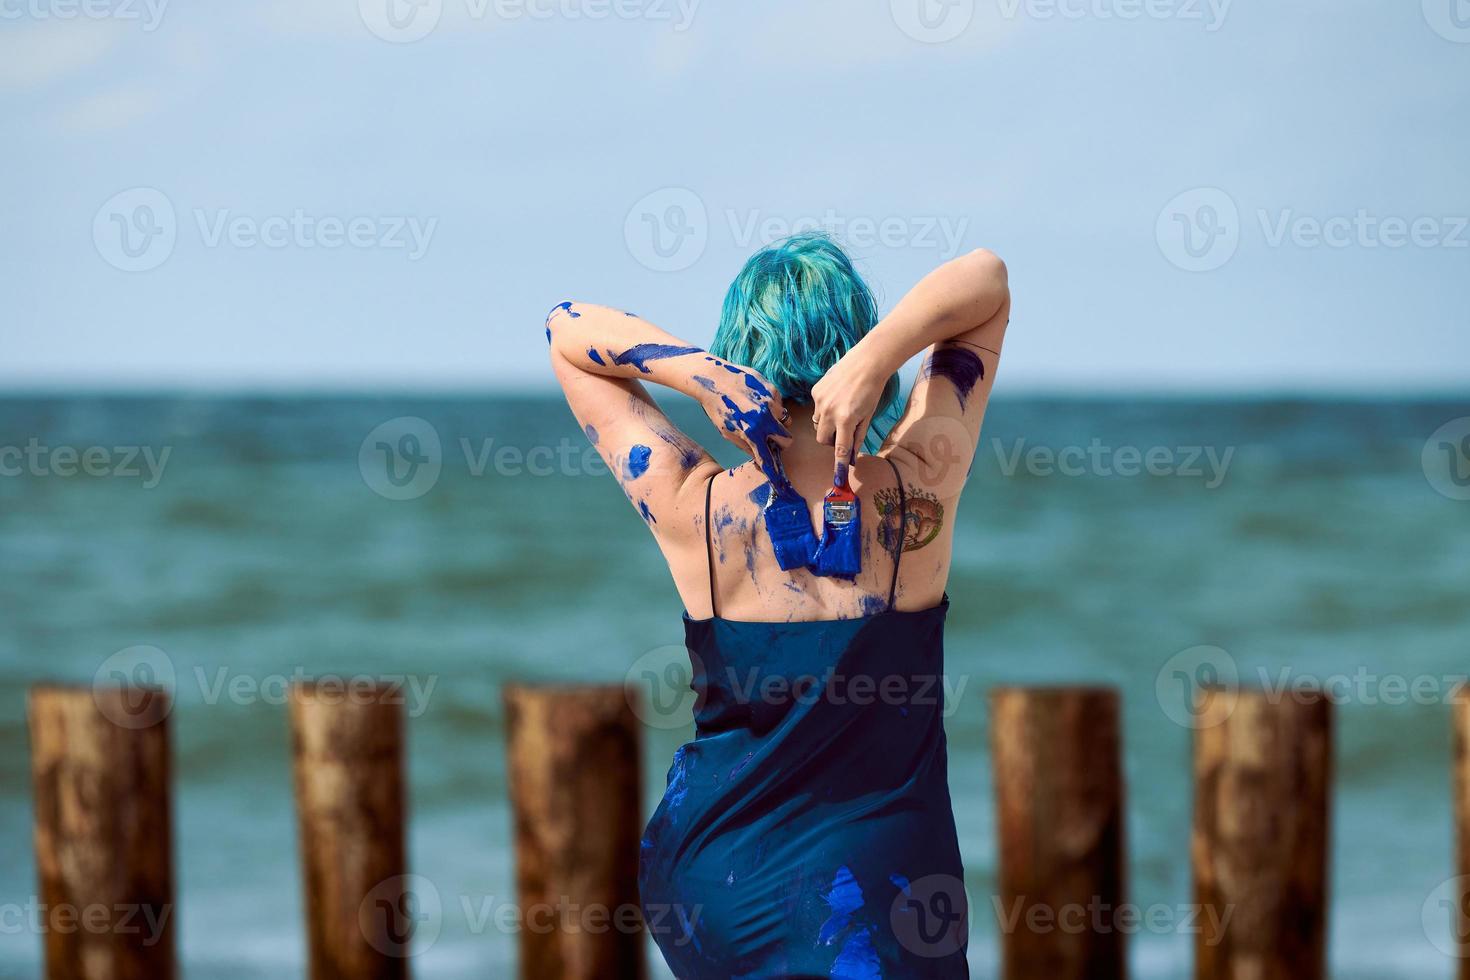 Artistic blue-haired woman performance artist in dress smeared with blue gouache paints on her body photo